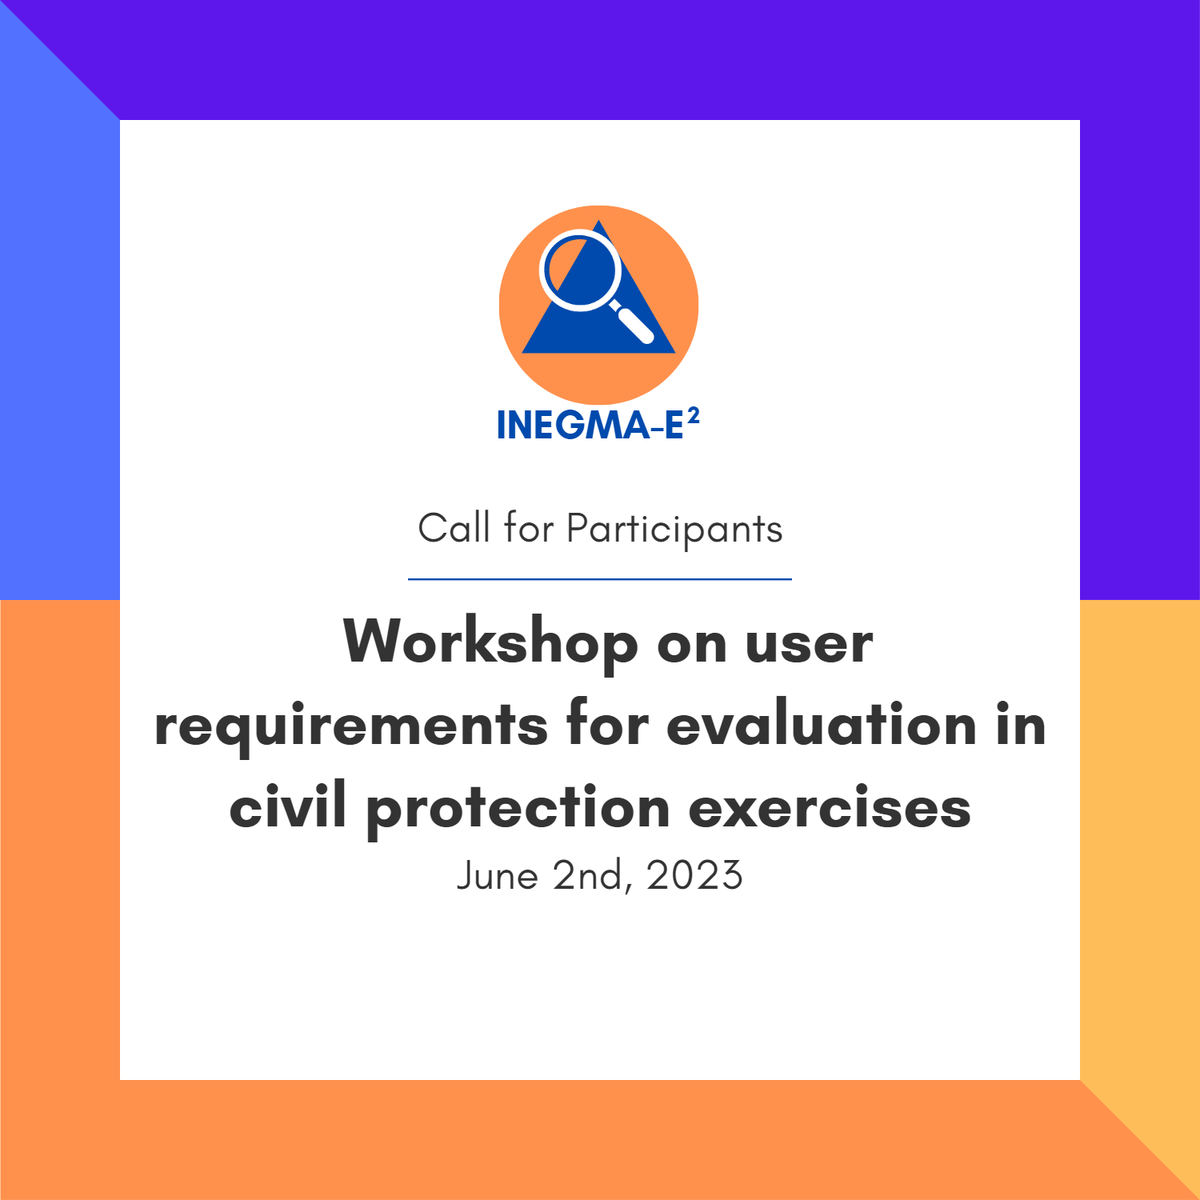 We are looking for #civilprotection exercise experts to participate in our workshop on user requirements for #exerciseevaluation.
 
📍 When: June 2nd, 2023, 10-16h CET
📍 Where: online (Microsoft Teams)
 
Please contact office@inegma-e2.eu to register.

#EUproject #drr #drm